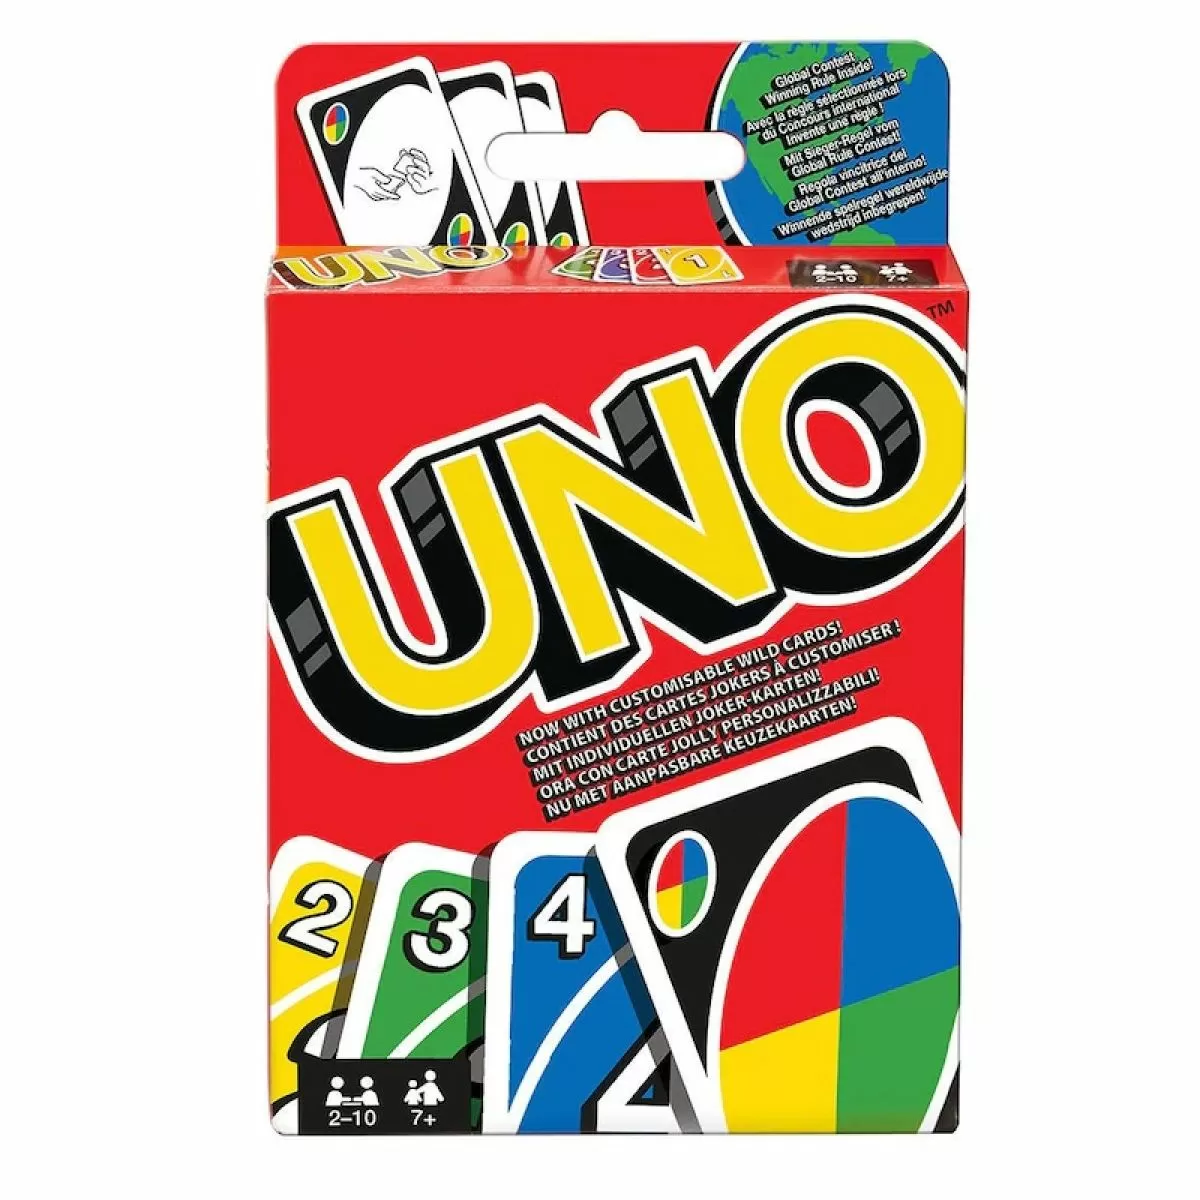 Star Wars Disney Mattel UNO Card Game with Special the Force Rule